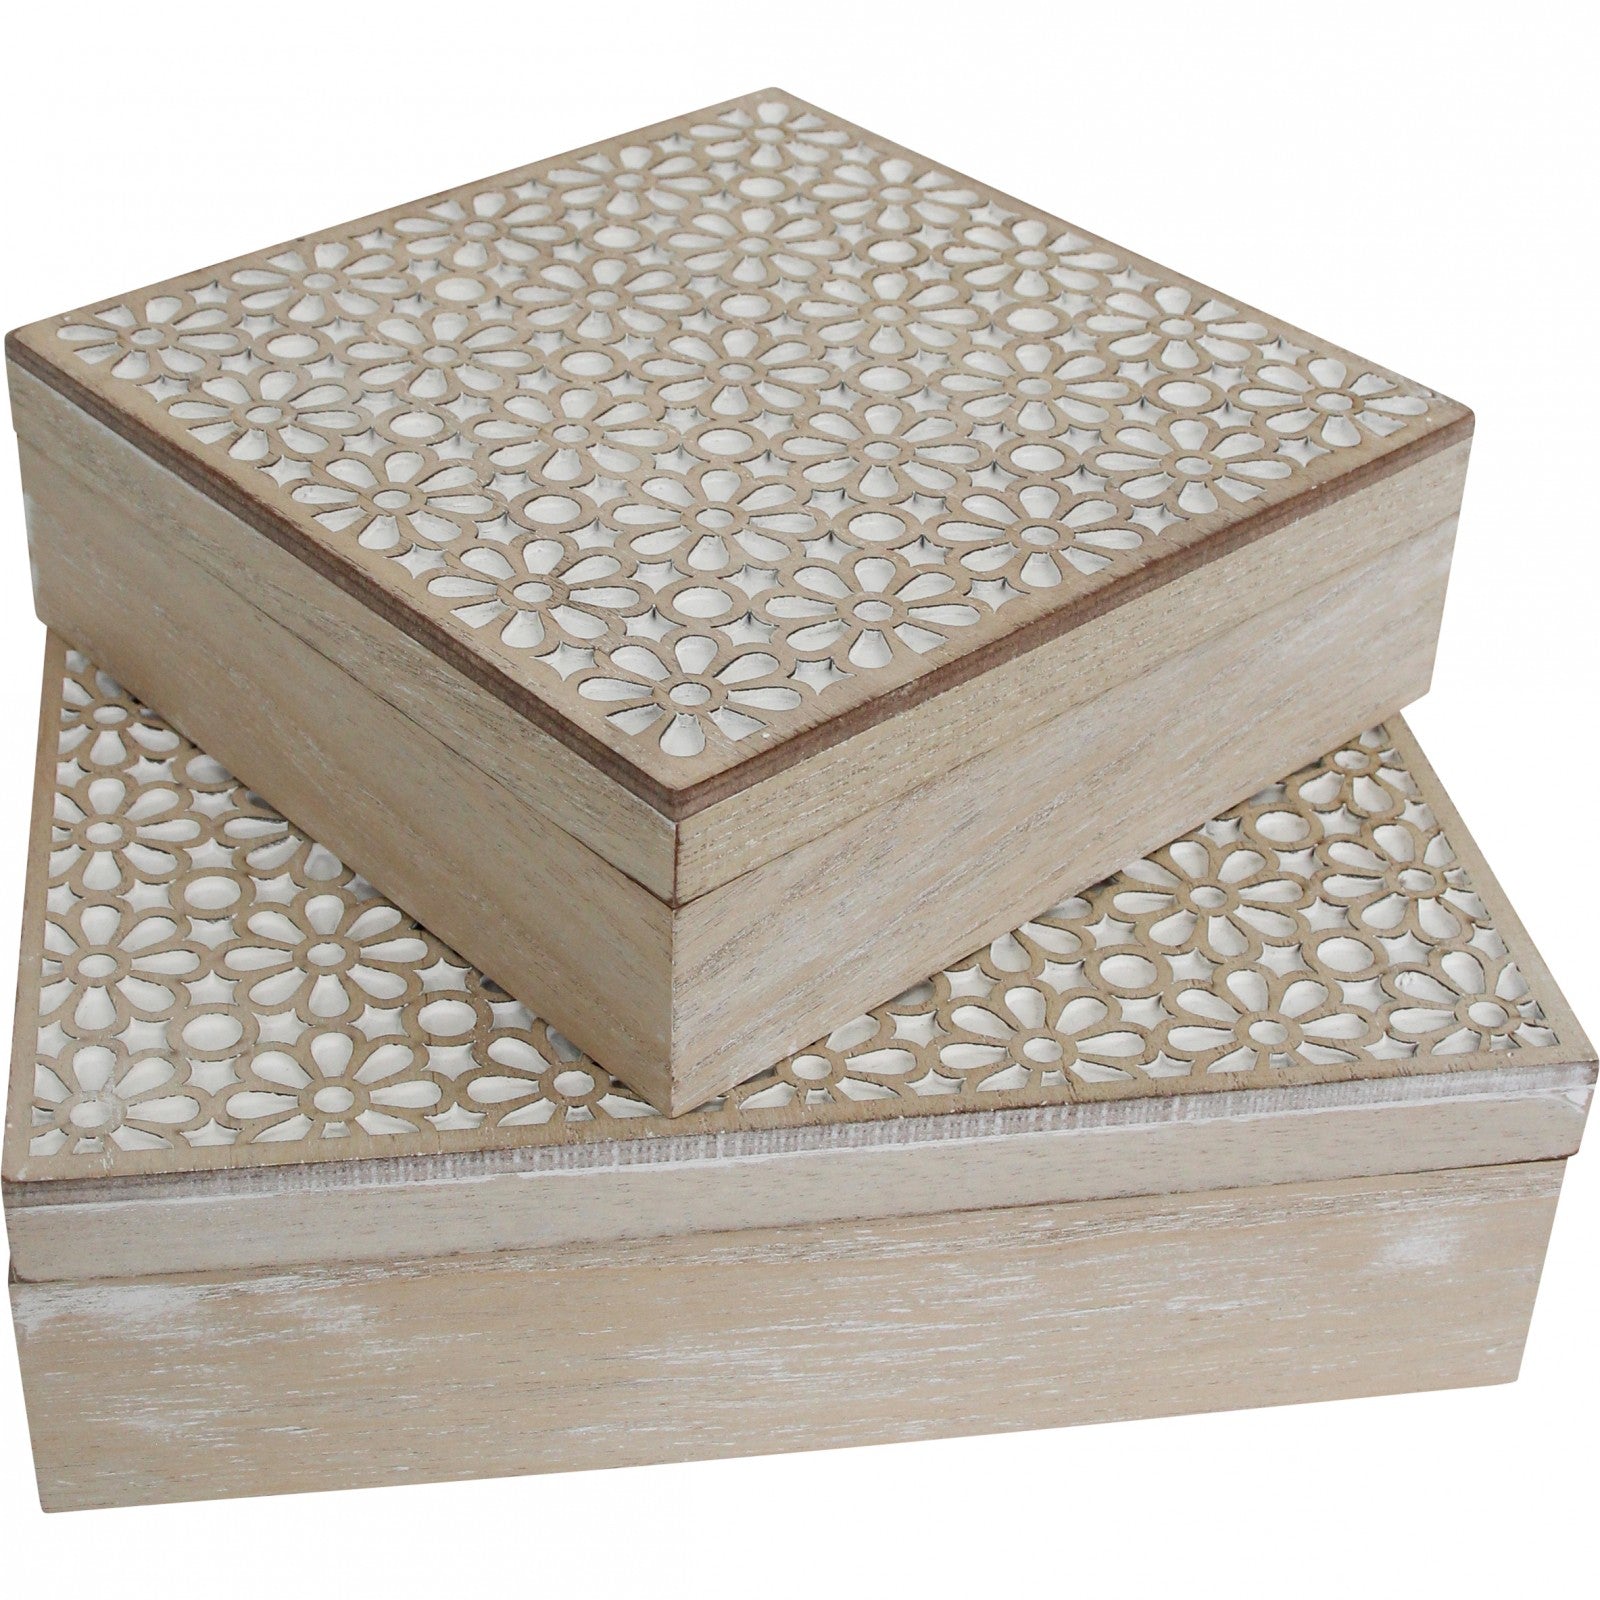 Wooden Daisy Boxes - Set of 2 NZ